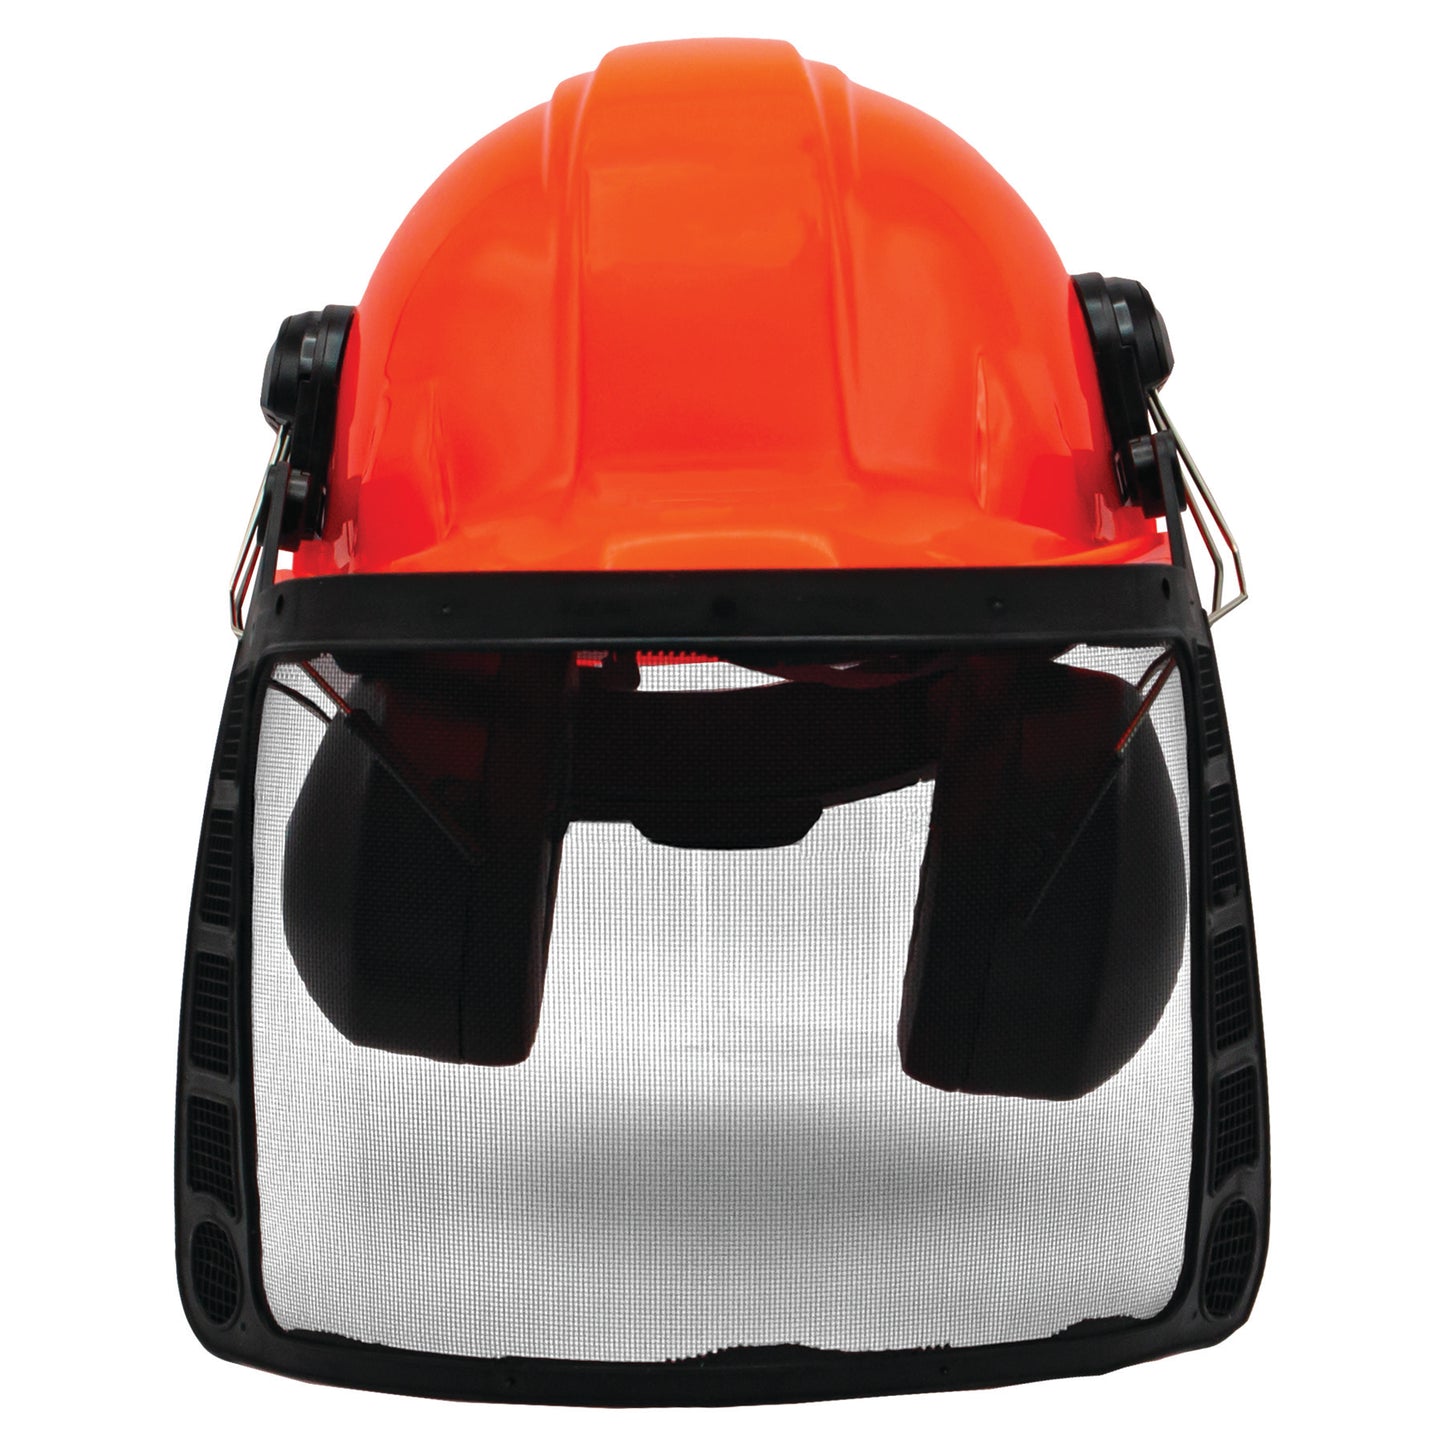 Complete Forestry Helmet System Includes Helmet, Muffs, Face Screen, and Safety Glasses